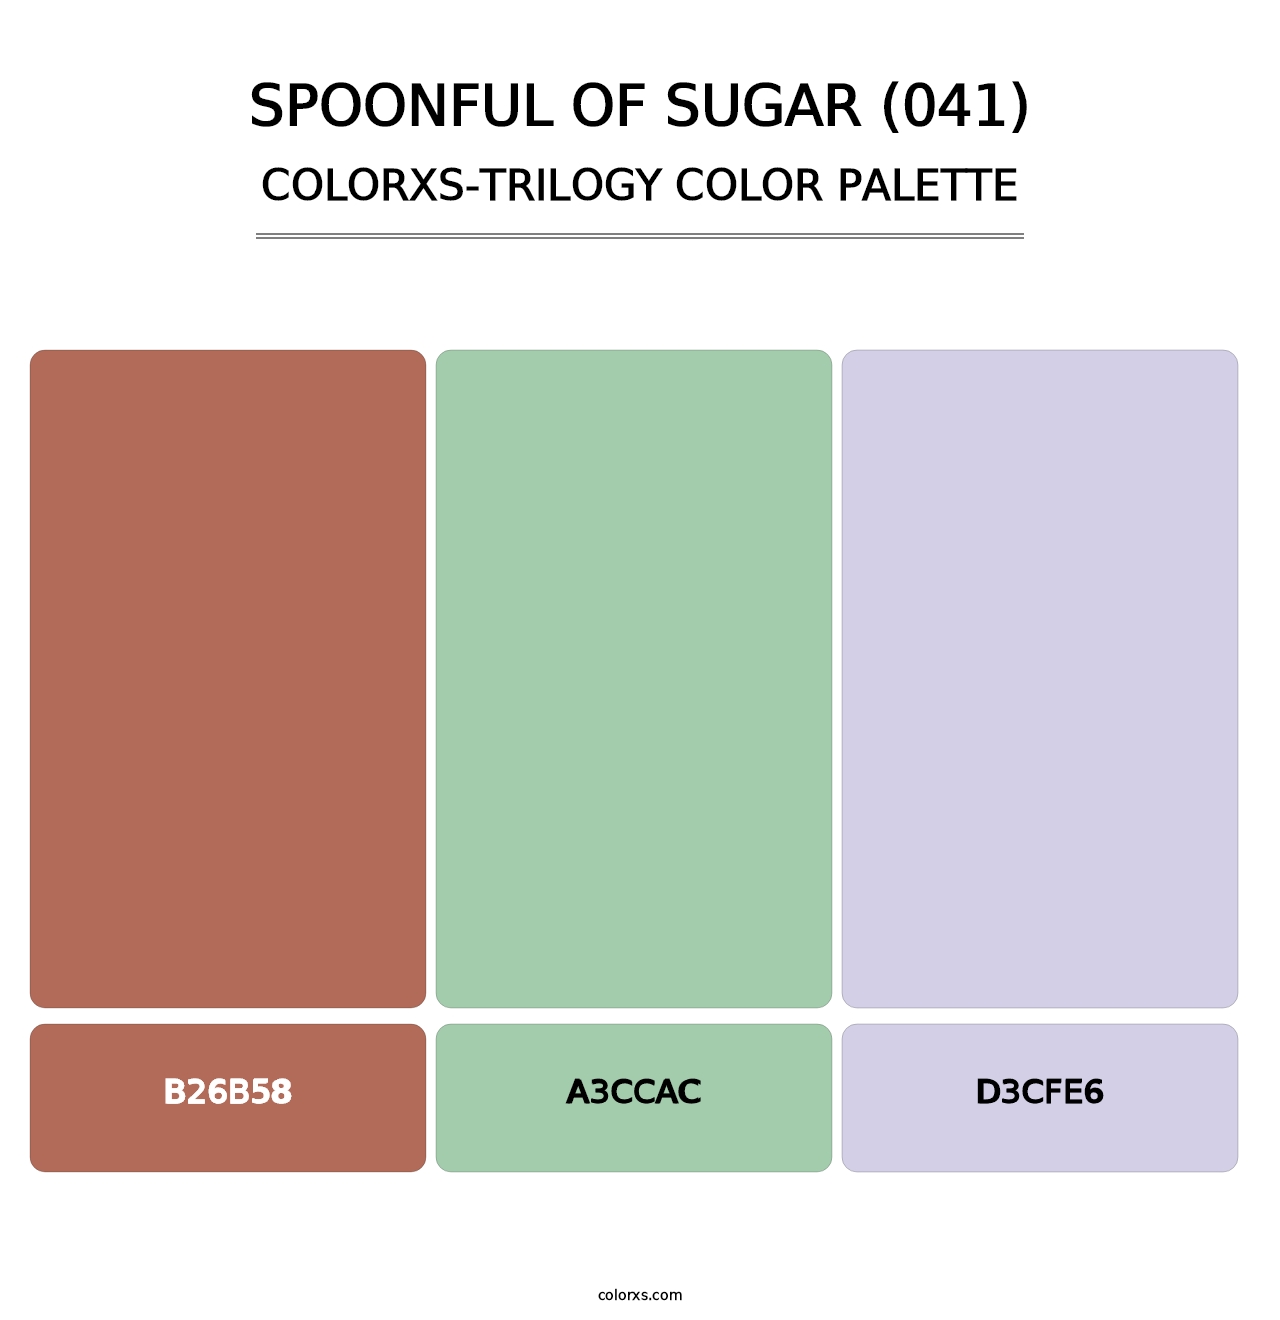 Spoonful of Sugar (041) - Colorxs Trilogy Palette